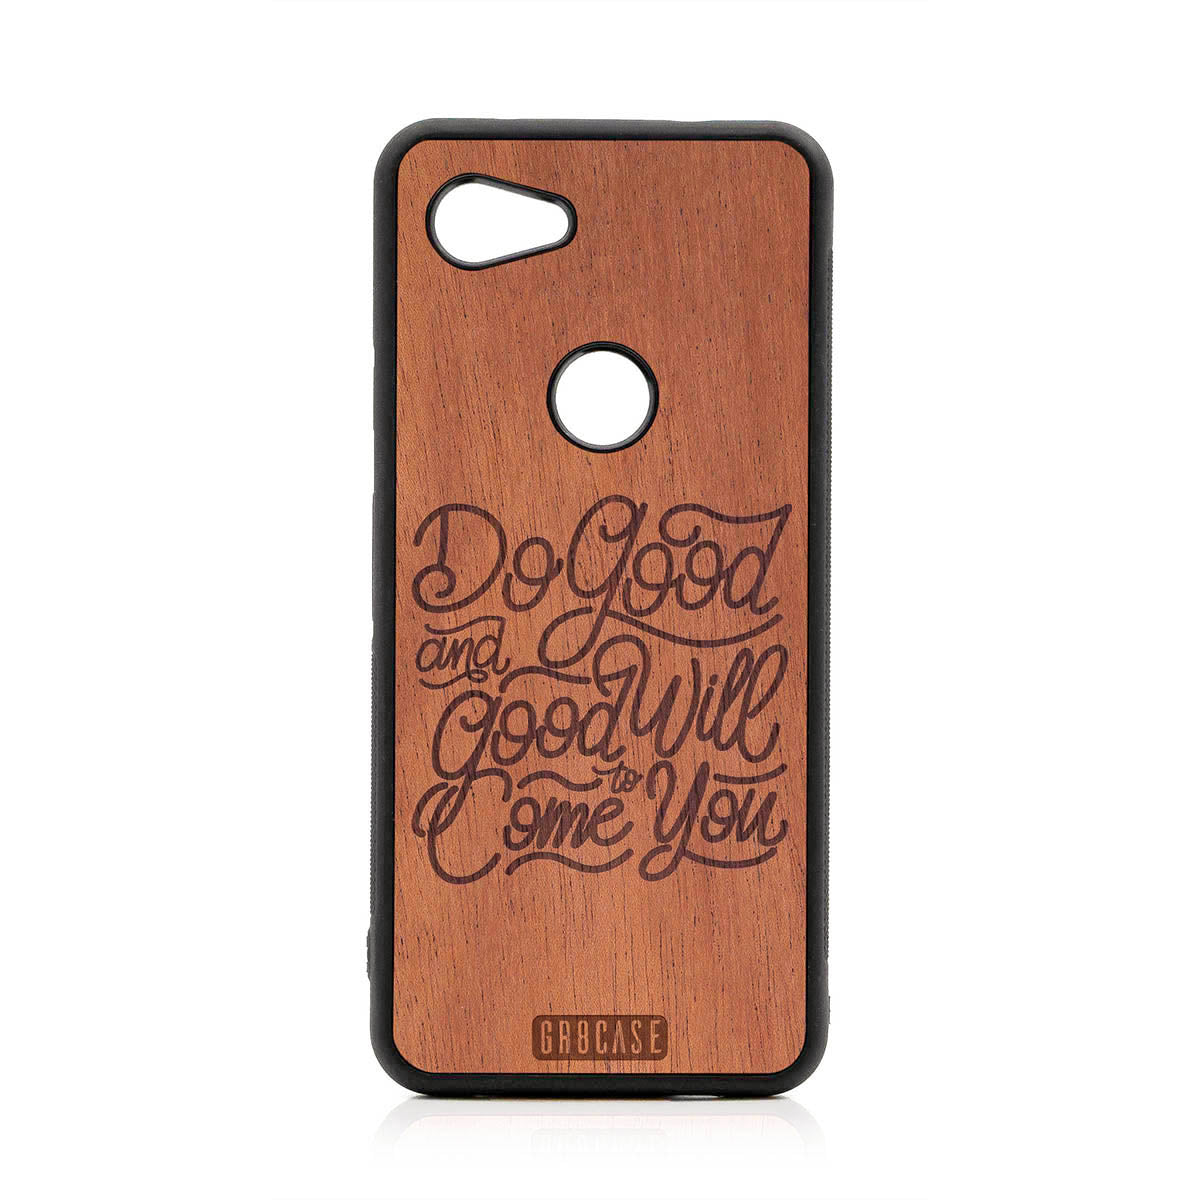 Do Good And Good Will Come To You Design Wood Case For Google Pixel 3A XL by GR8CASE